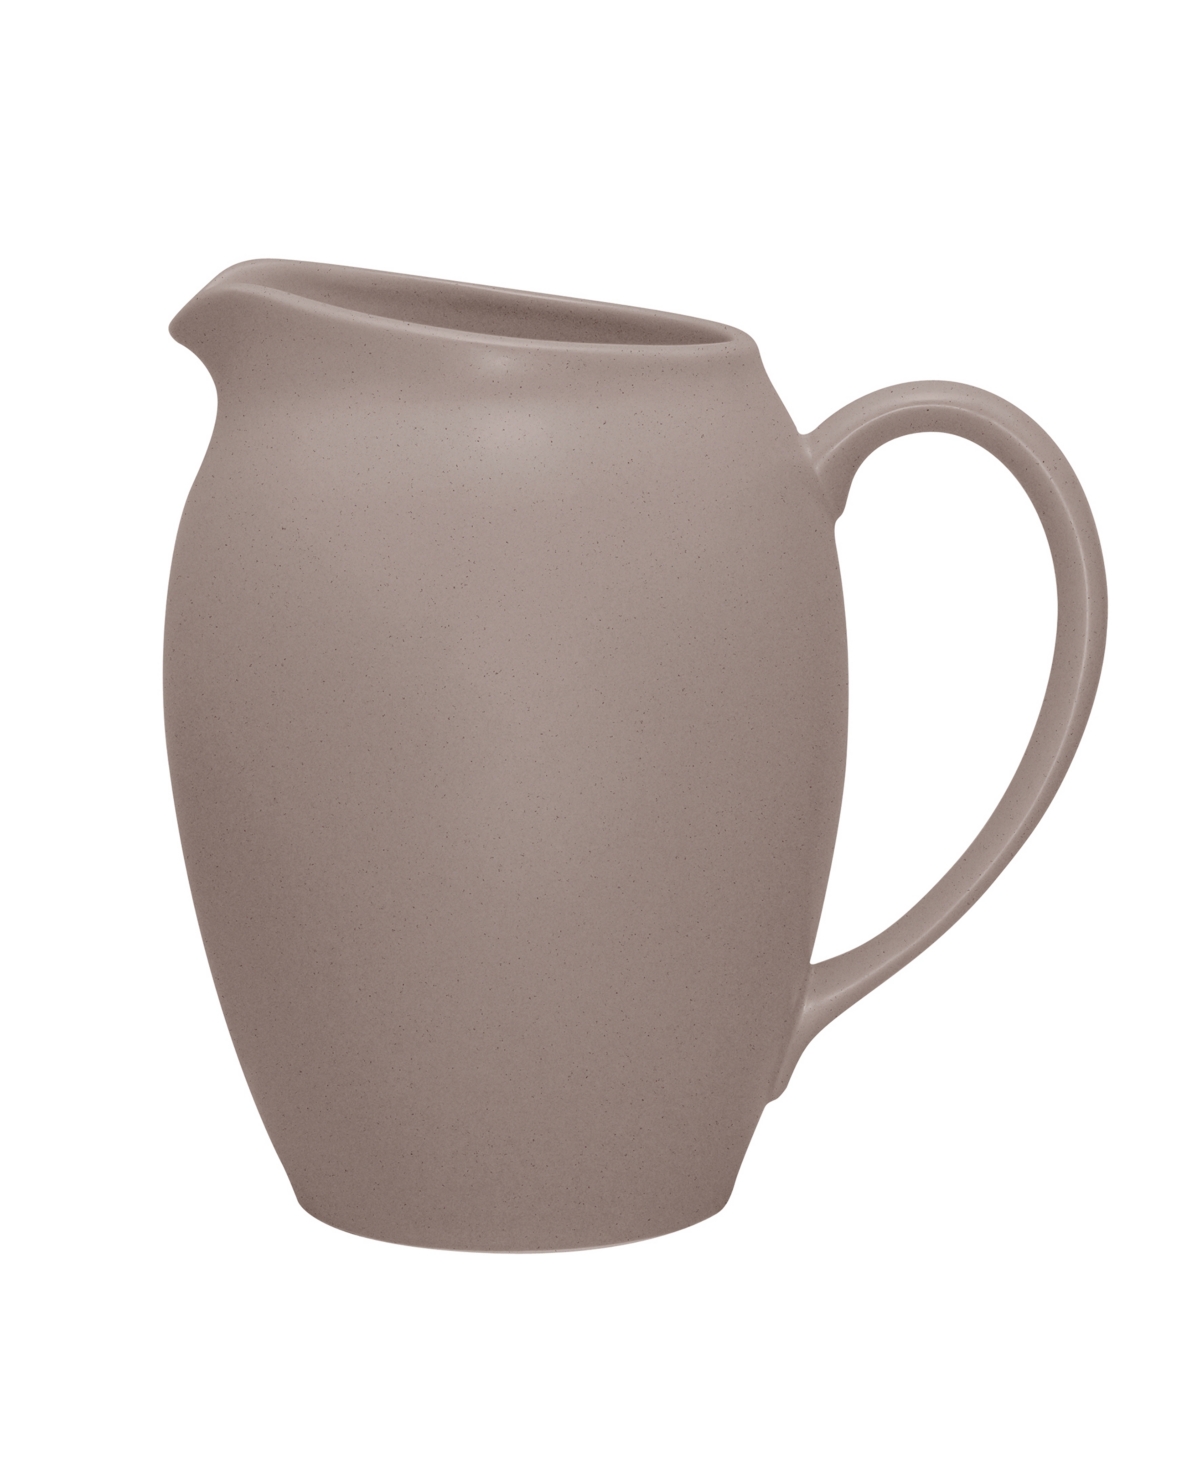 Noritake Colowave Pitcher, 60 oz In Clay